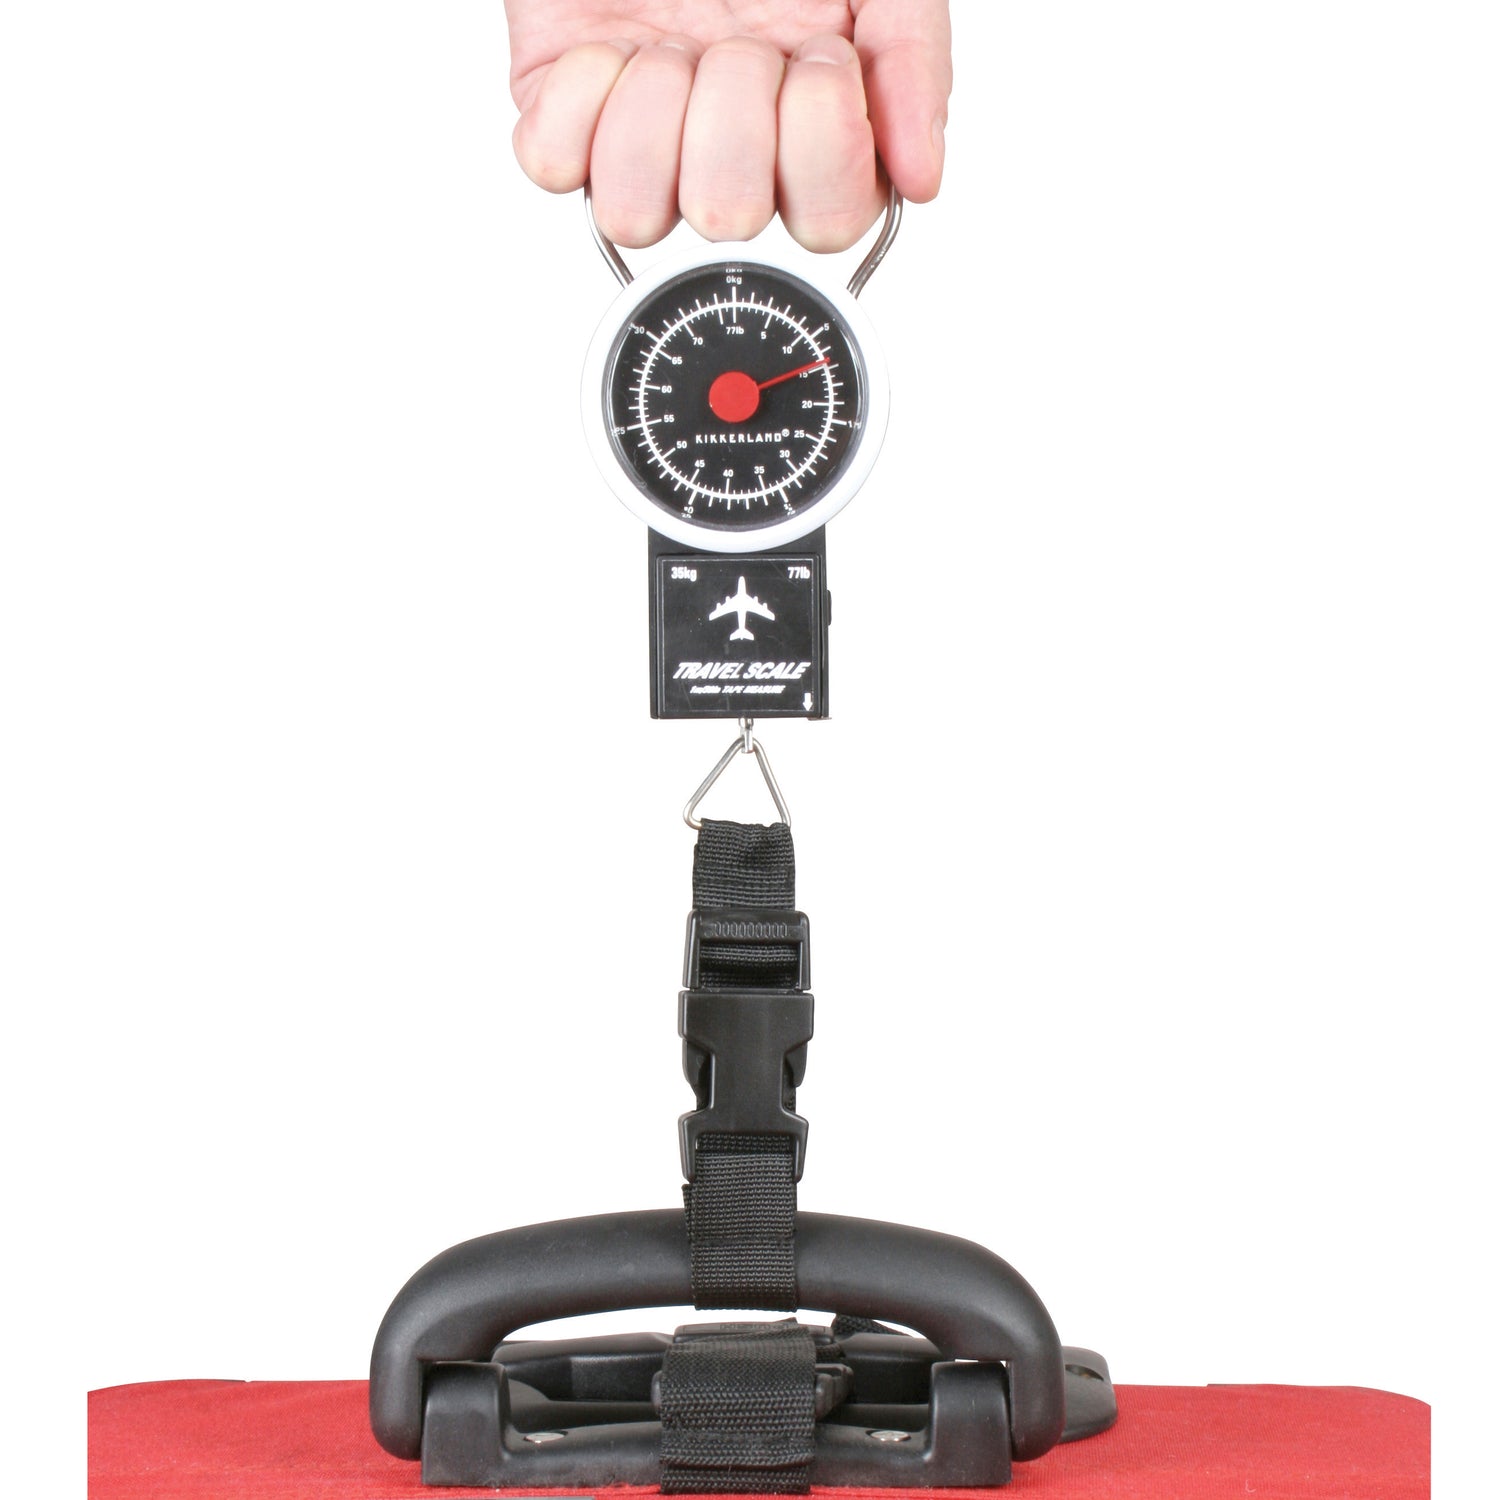 THE B1 TRAVEL LUGGAGE SCALE